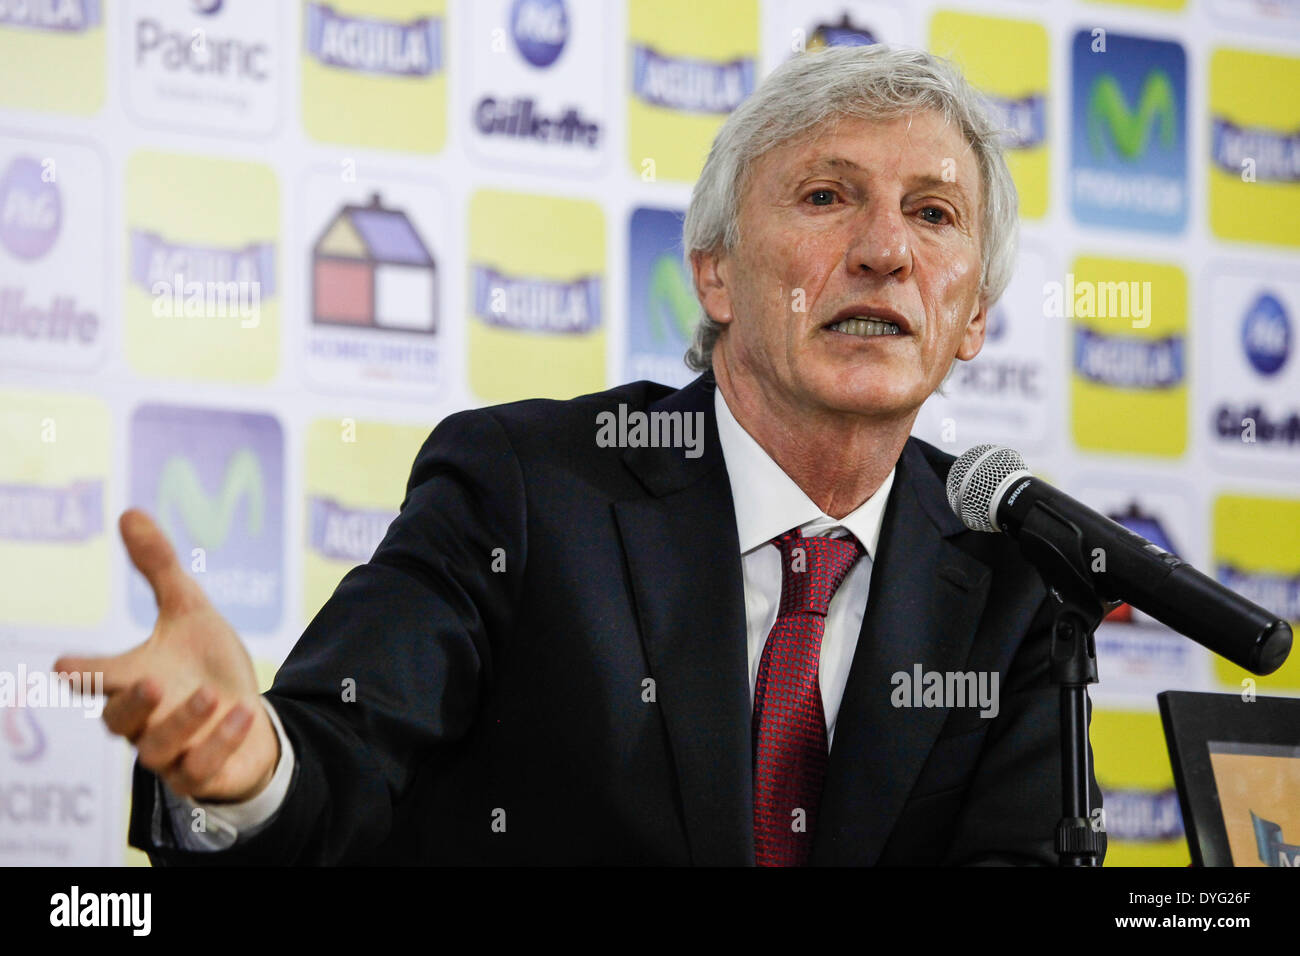 Bogota, Colombia. 16th Apr, 2014. Colombia's national soccer team head coach Jose Pekerman participates in a press conference in Bogota, Colombia, on April 16, 2014. Pekerman presented his latest movements on the Colombian team before the Brazil 2014 World Cup and announced that Colombia will play two friendly matches in Argentina, according to local press. © Jhon Paz/Xinhua/Alamy Live News Stock Photo